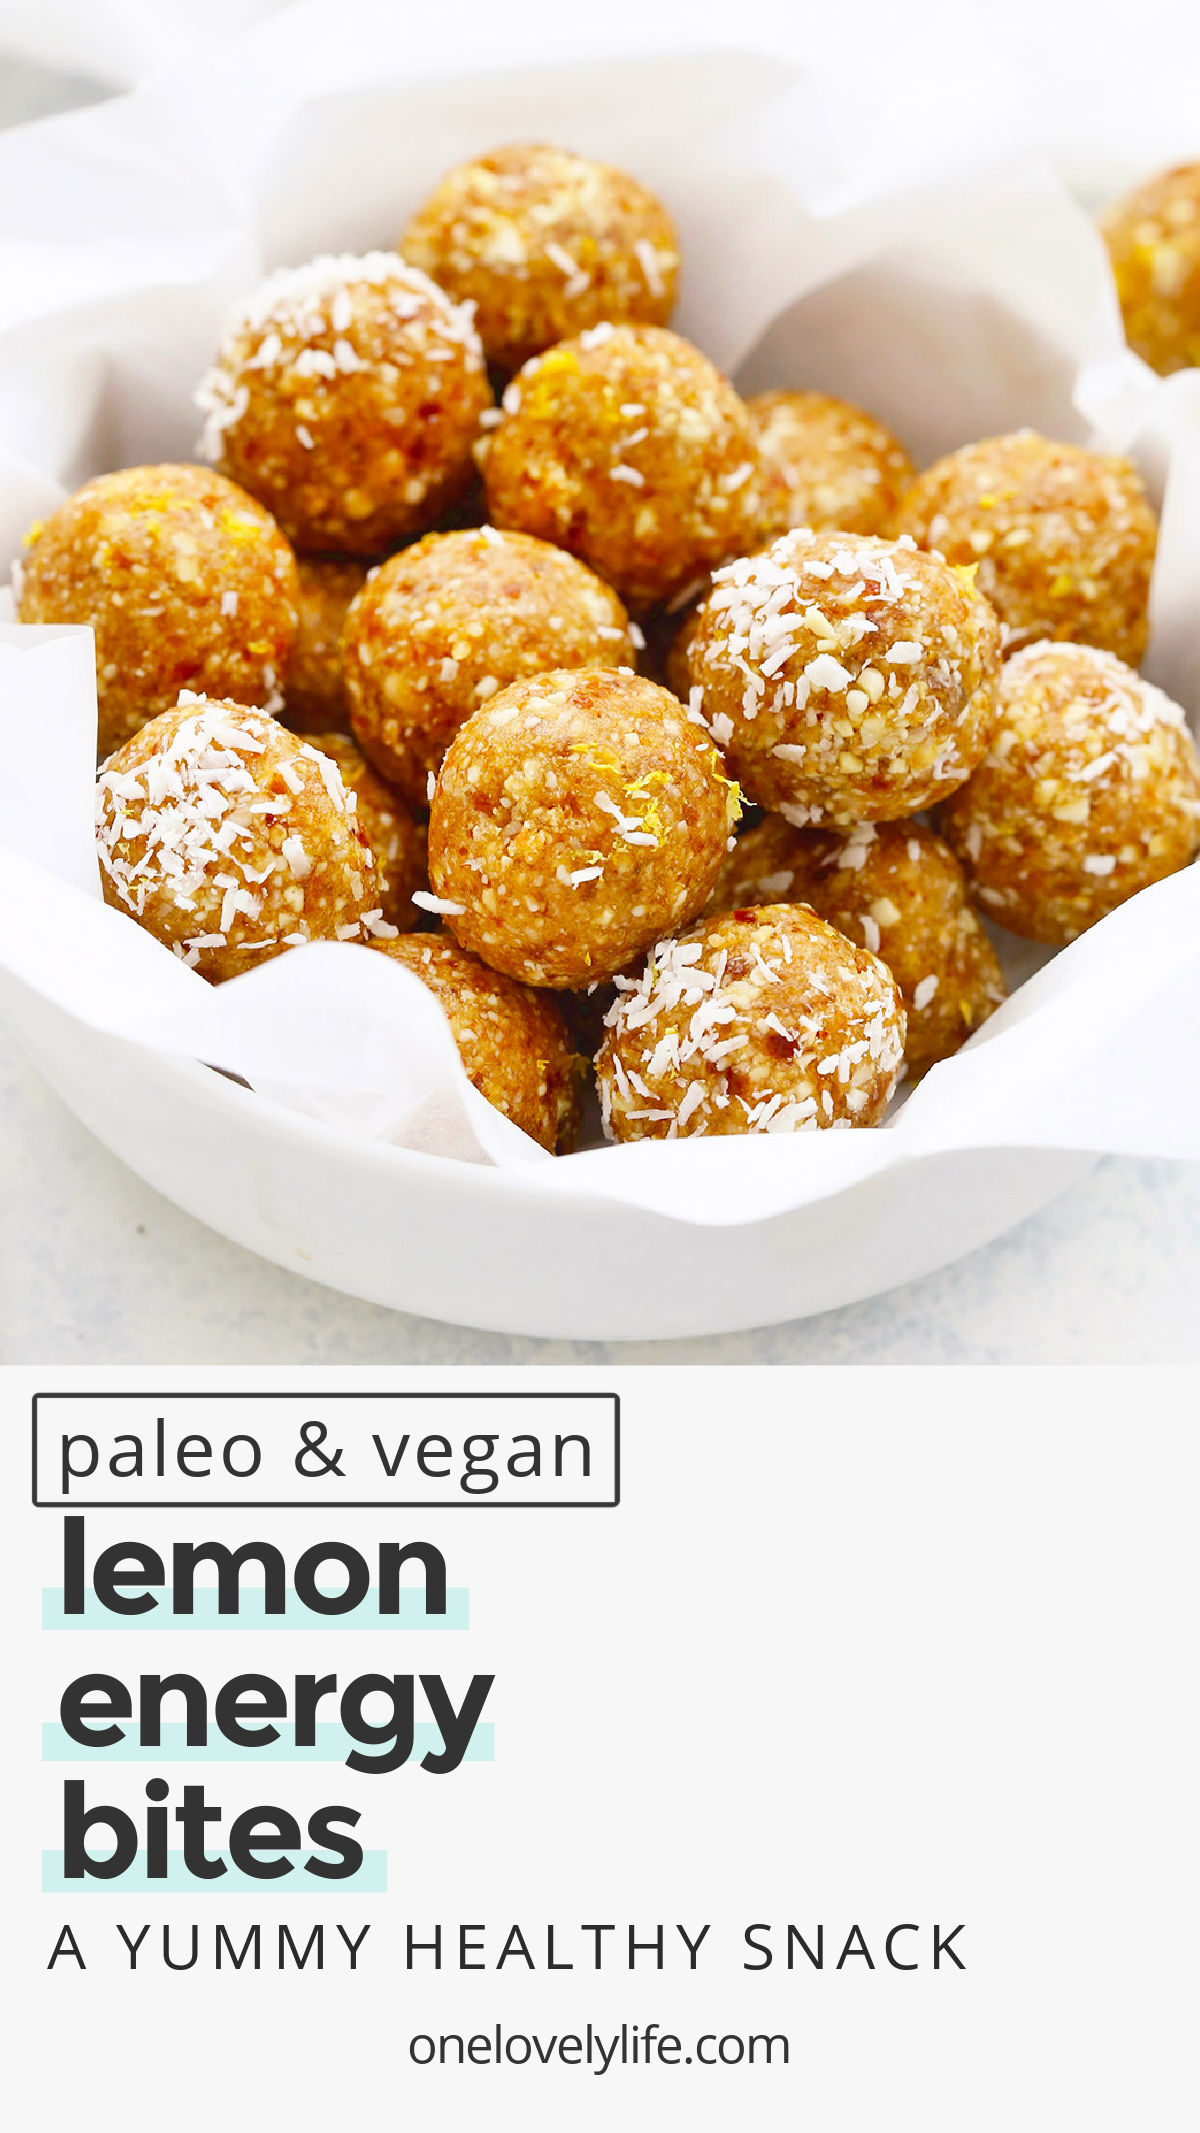 No-Bake Lemon Energy Bites - These tasty lemon energy balls make such a yummy snack or healthy treat! They're a hit with kids and grown-ups! (Gluten-Free, Vegan, Paleo) // Energy ball recipe // lemon cheesecake energy bites // healthy snack // meal prep snack // healthy snack ideas // healthy snack recipes // lemon coconut energy bites // lemon coconut energy balls // paleo energy bites // whole30 snack // whole30 recipe